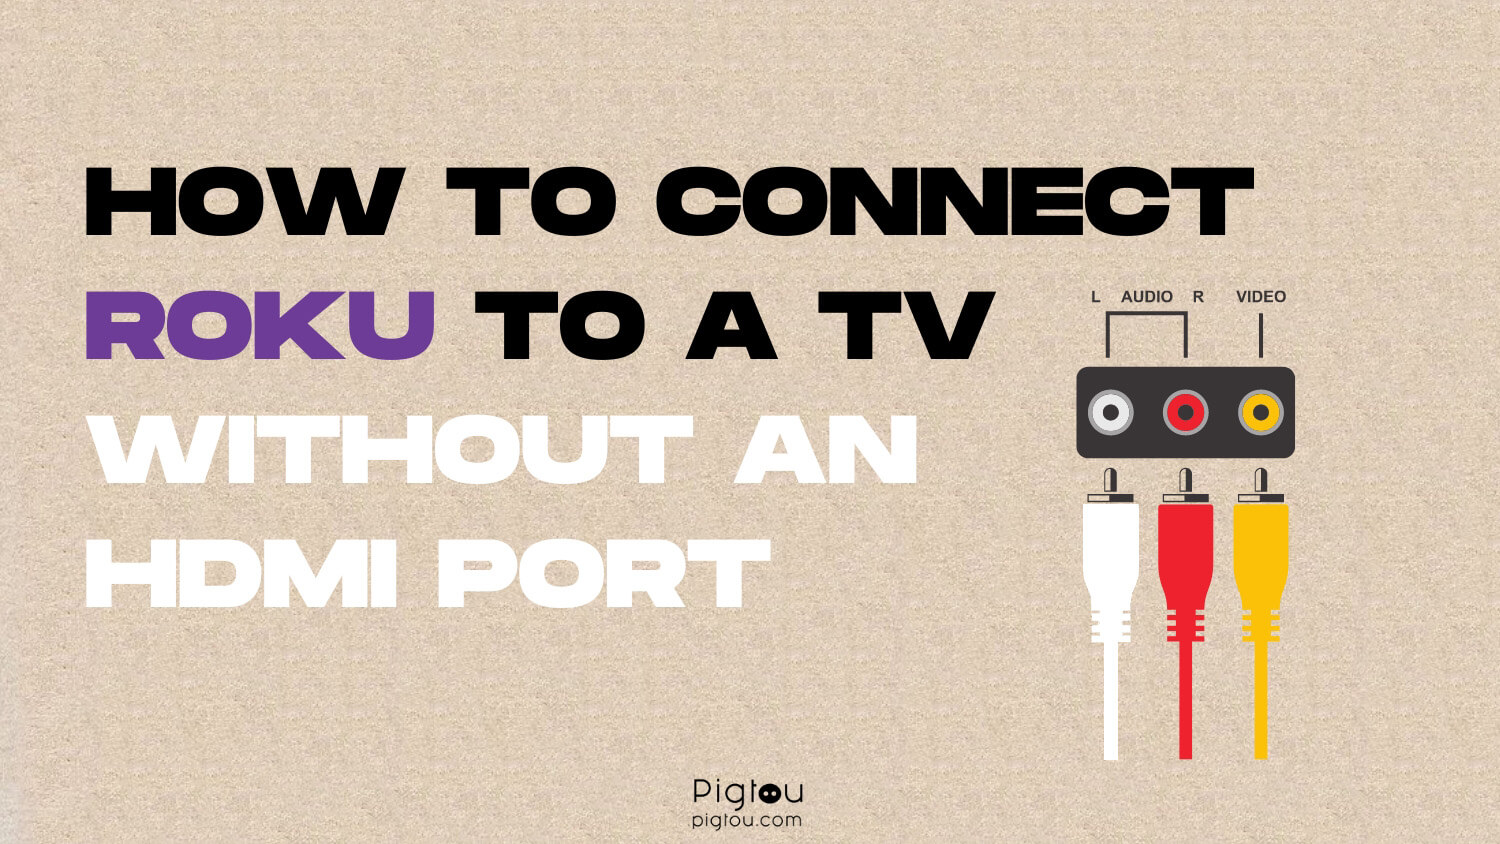 How To Connect Roku to a TV Without an HDMI Port